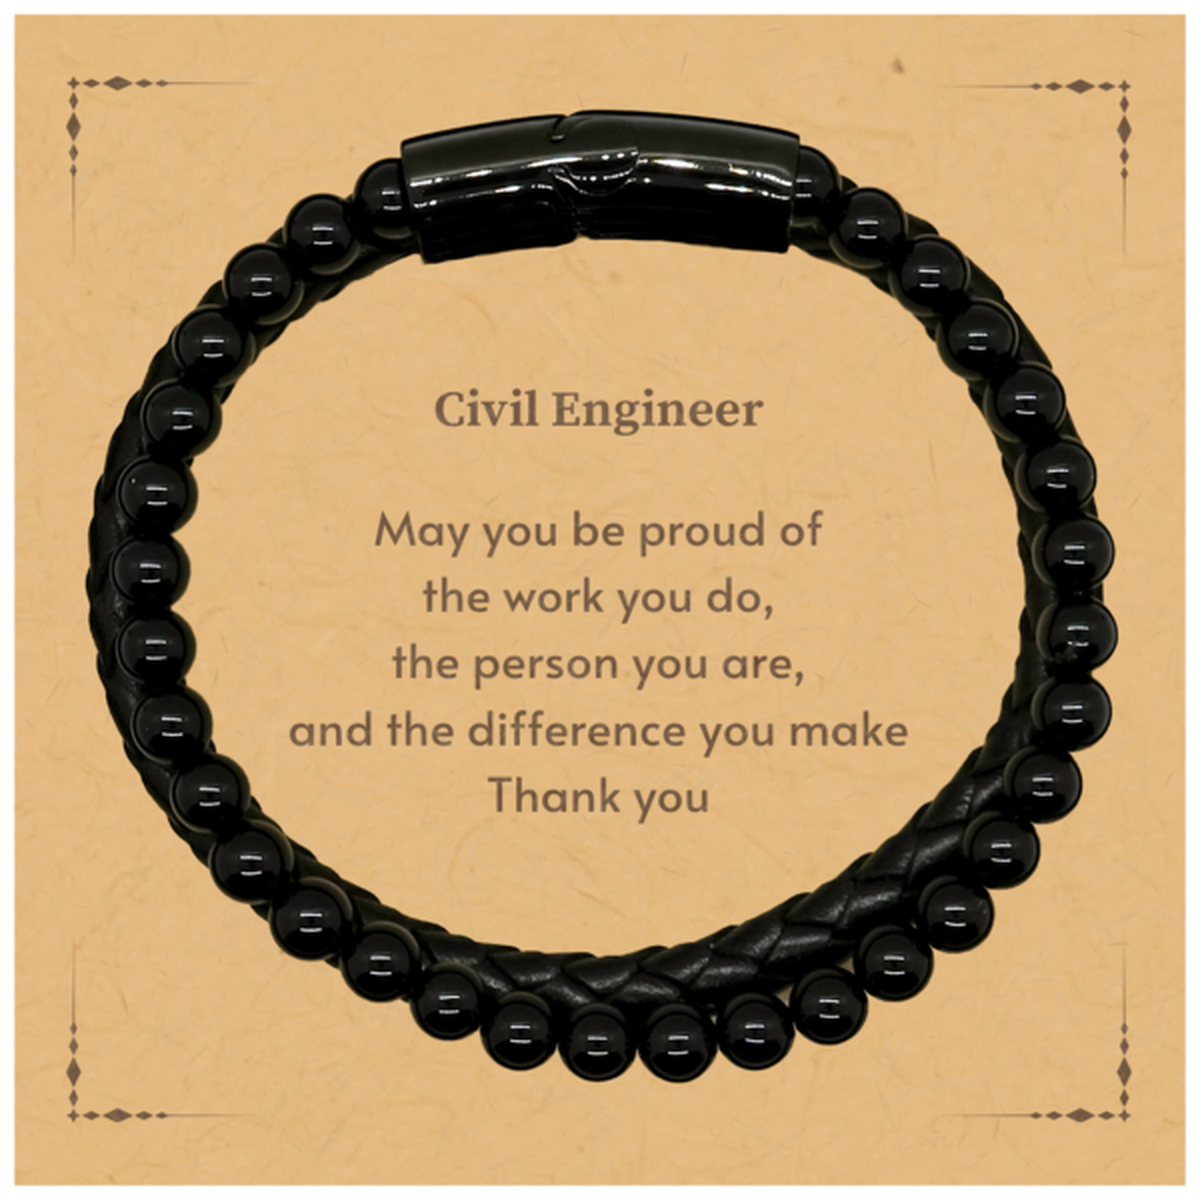 Heartwarming Stone Leather Bracelets Retirement Coworkers Gifts for Civil Engineer, Civil Engineer May You be proud of the work you do, the person you are Gifts for Boss Men Women Friends